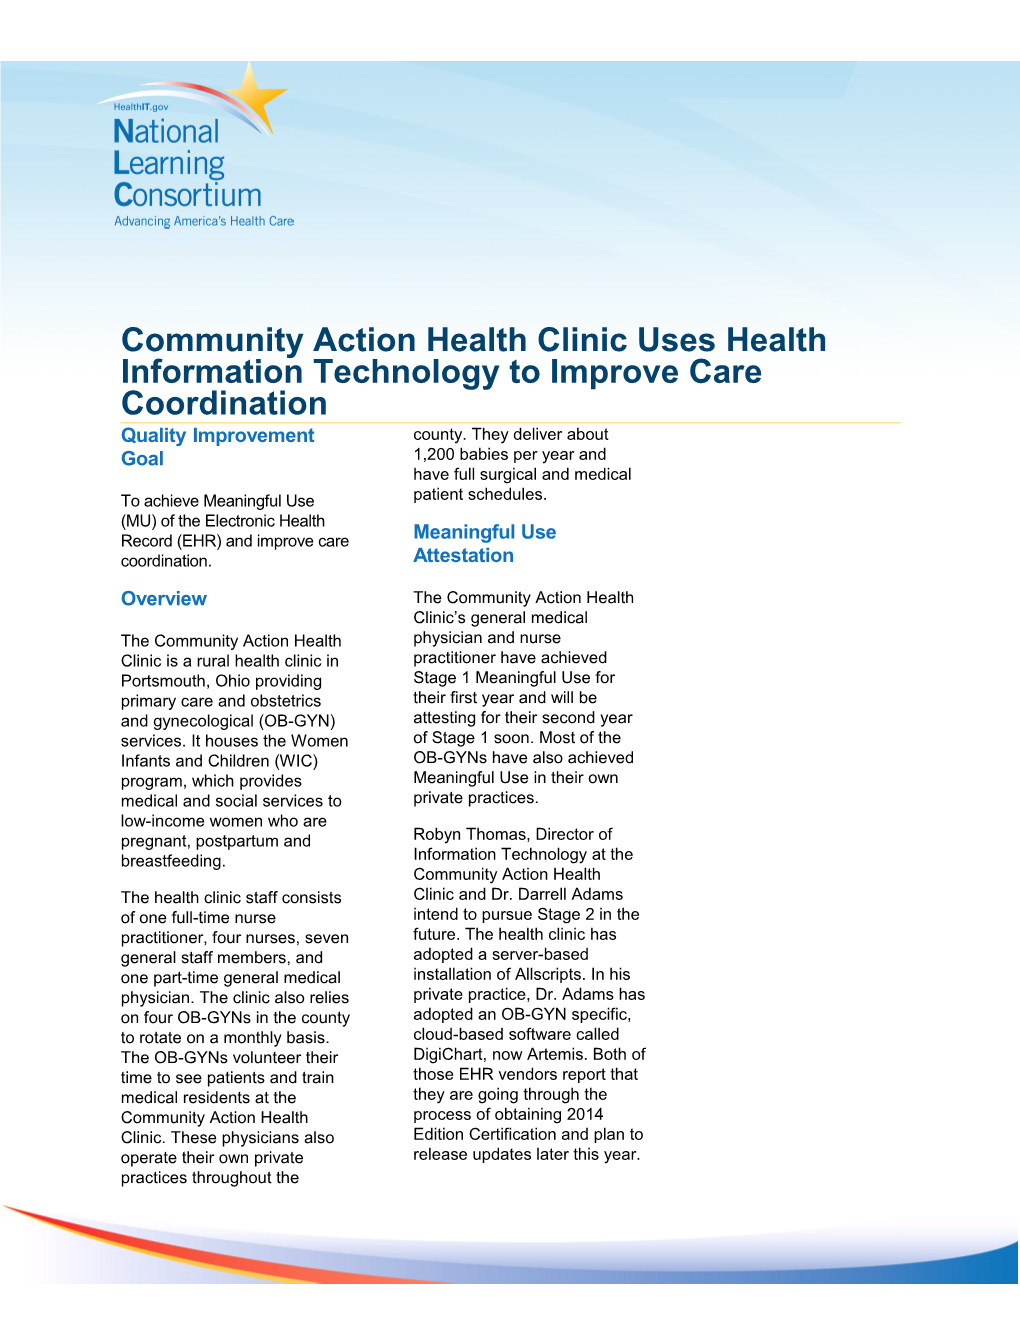 Urban Health Plan in New York Uses Its EHR Meaningfully to Improve Care Coordination